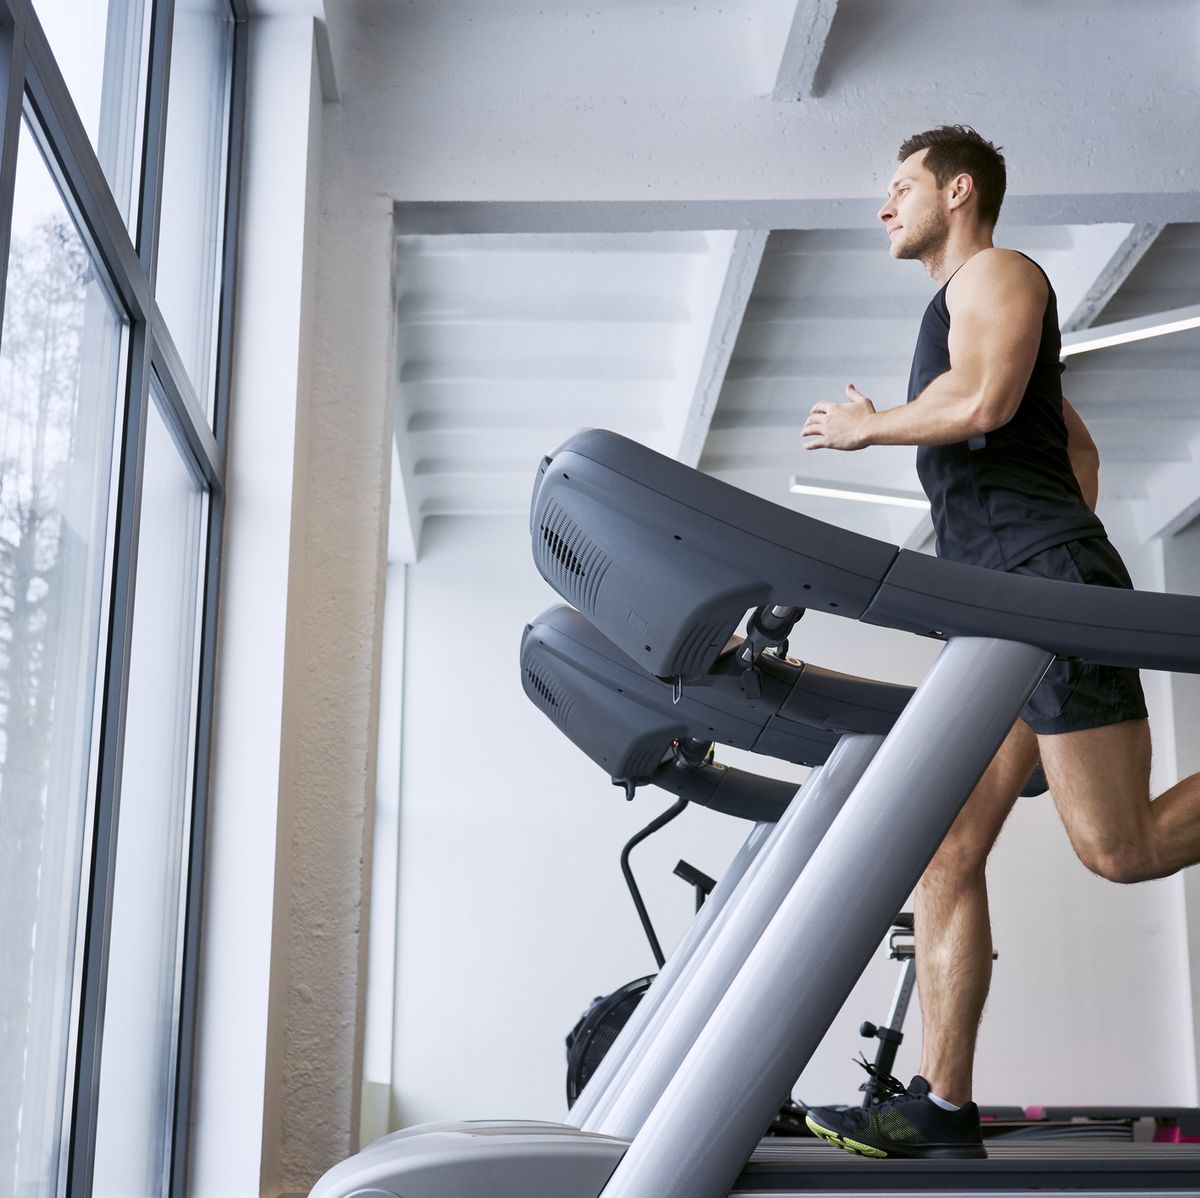 Treadmill Pace Chart: How to Find Your Pace on the Treadmill